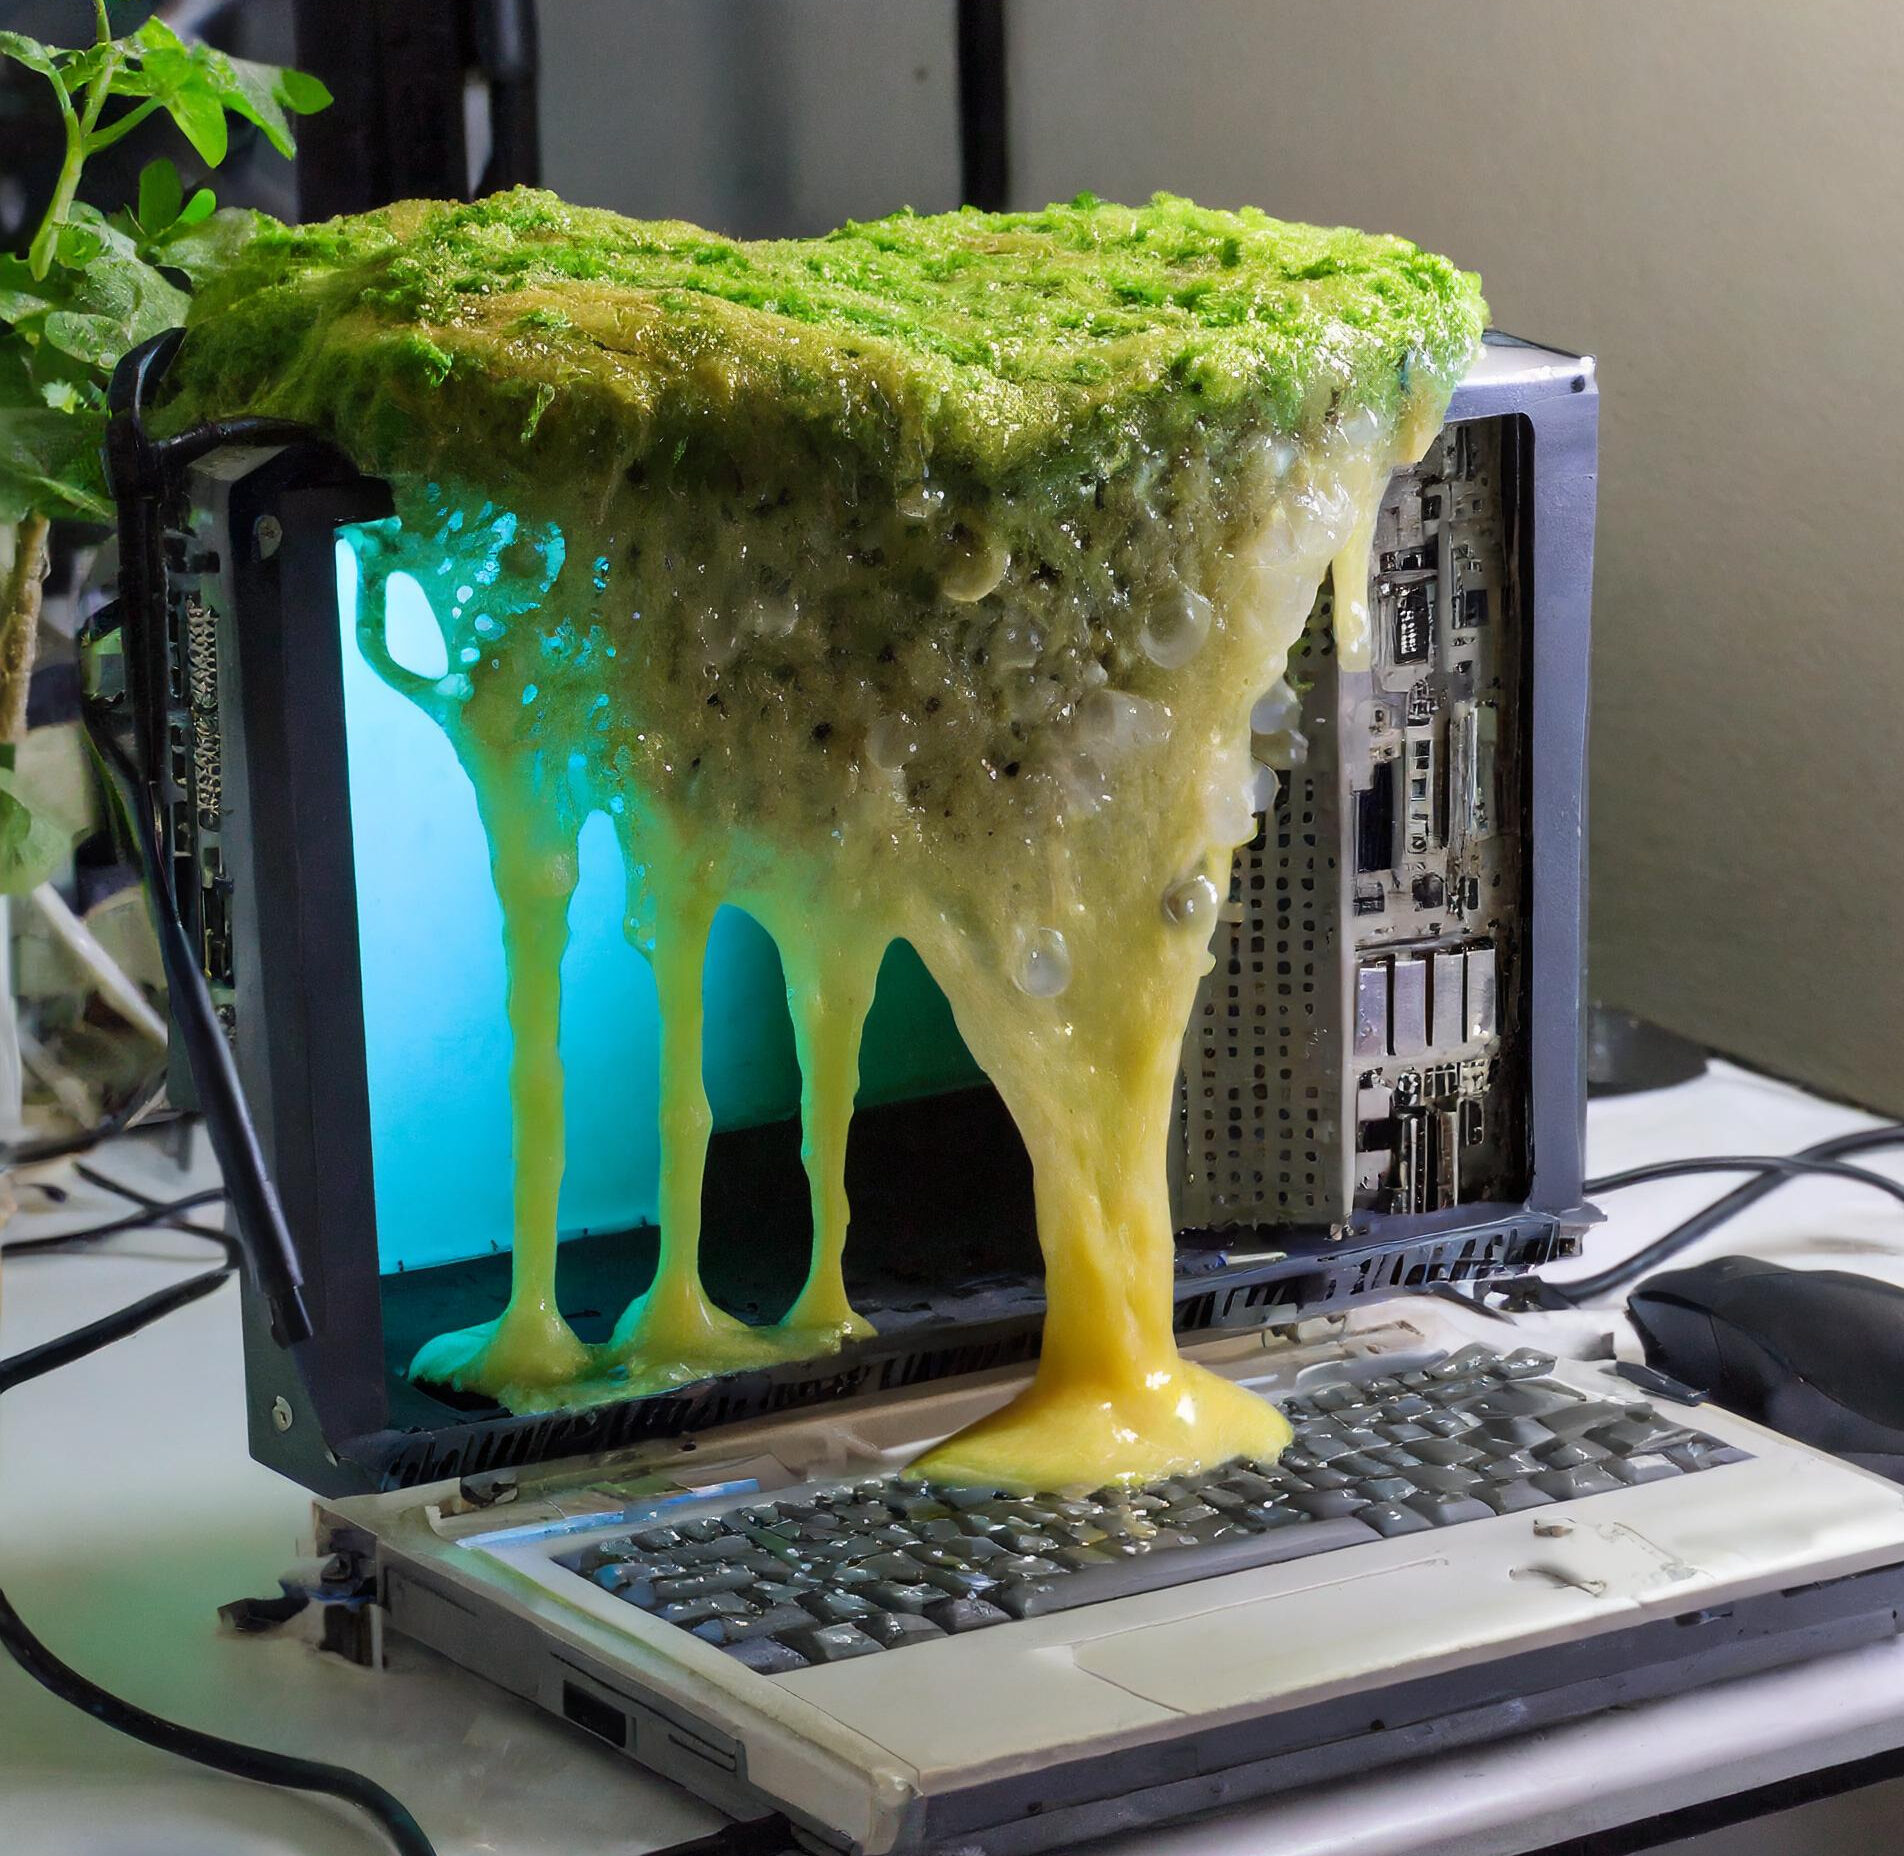 Slime dripping over a computer screen